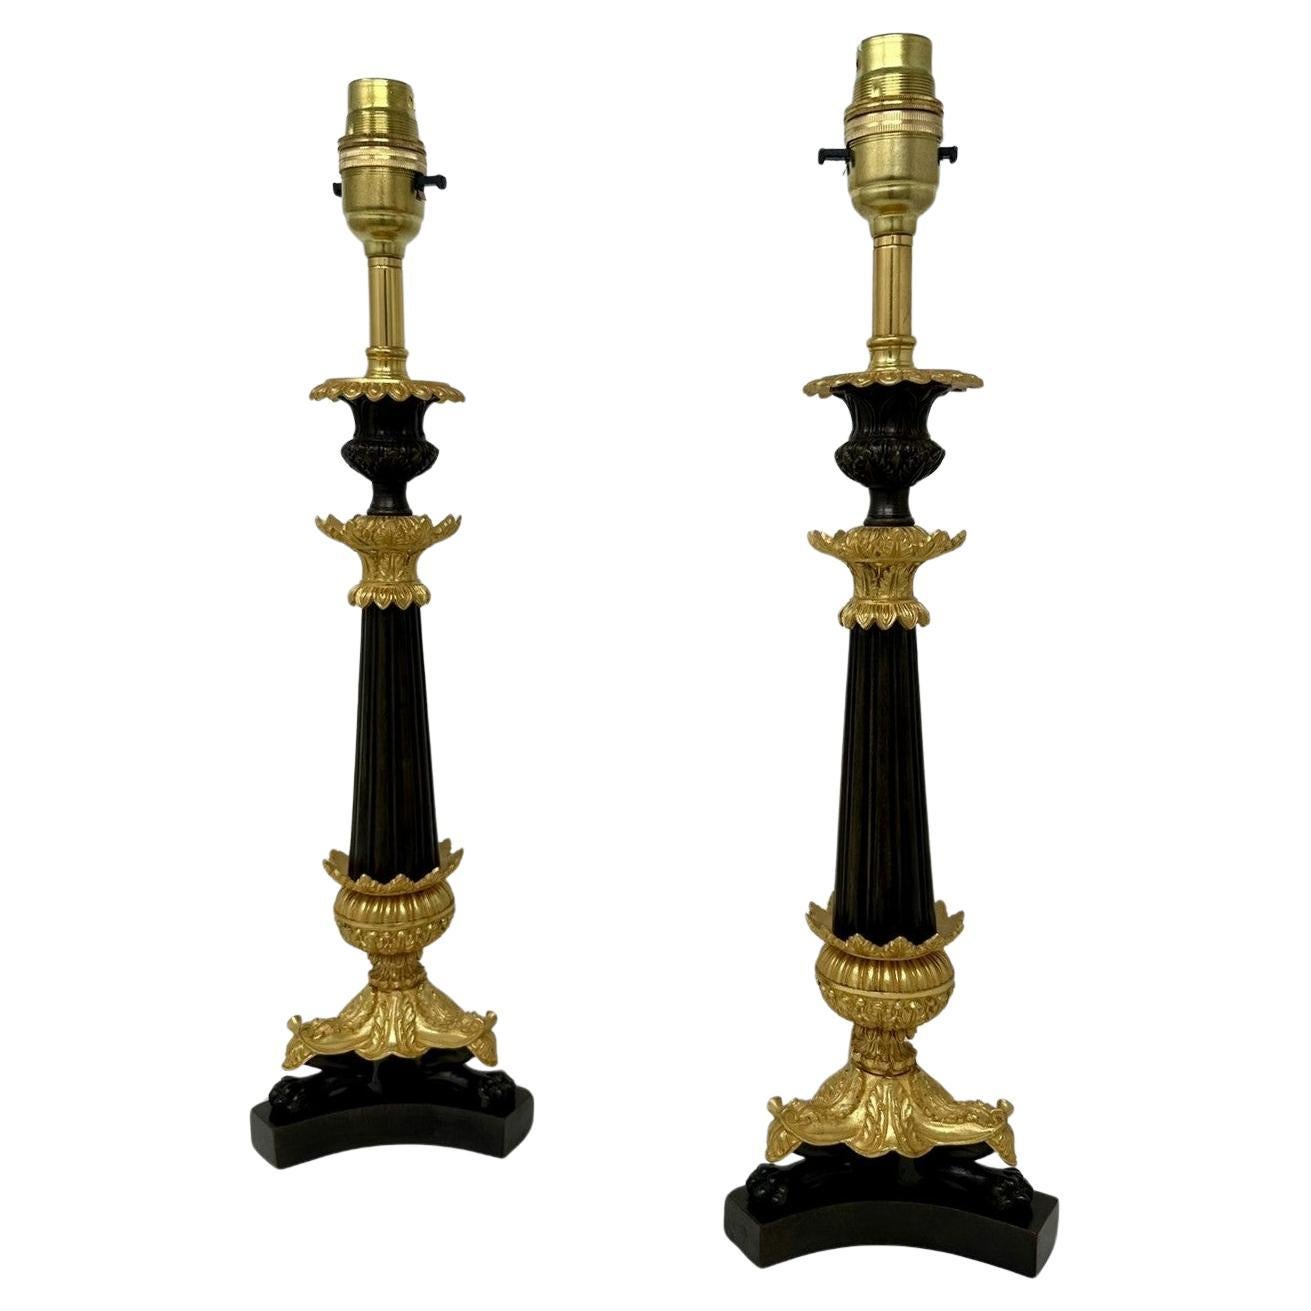 Antique Pair French Doré Bronze Neoclassical Ormolu Gilt Candlestick Table Lamps